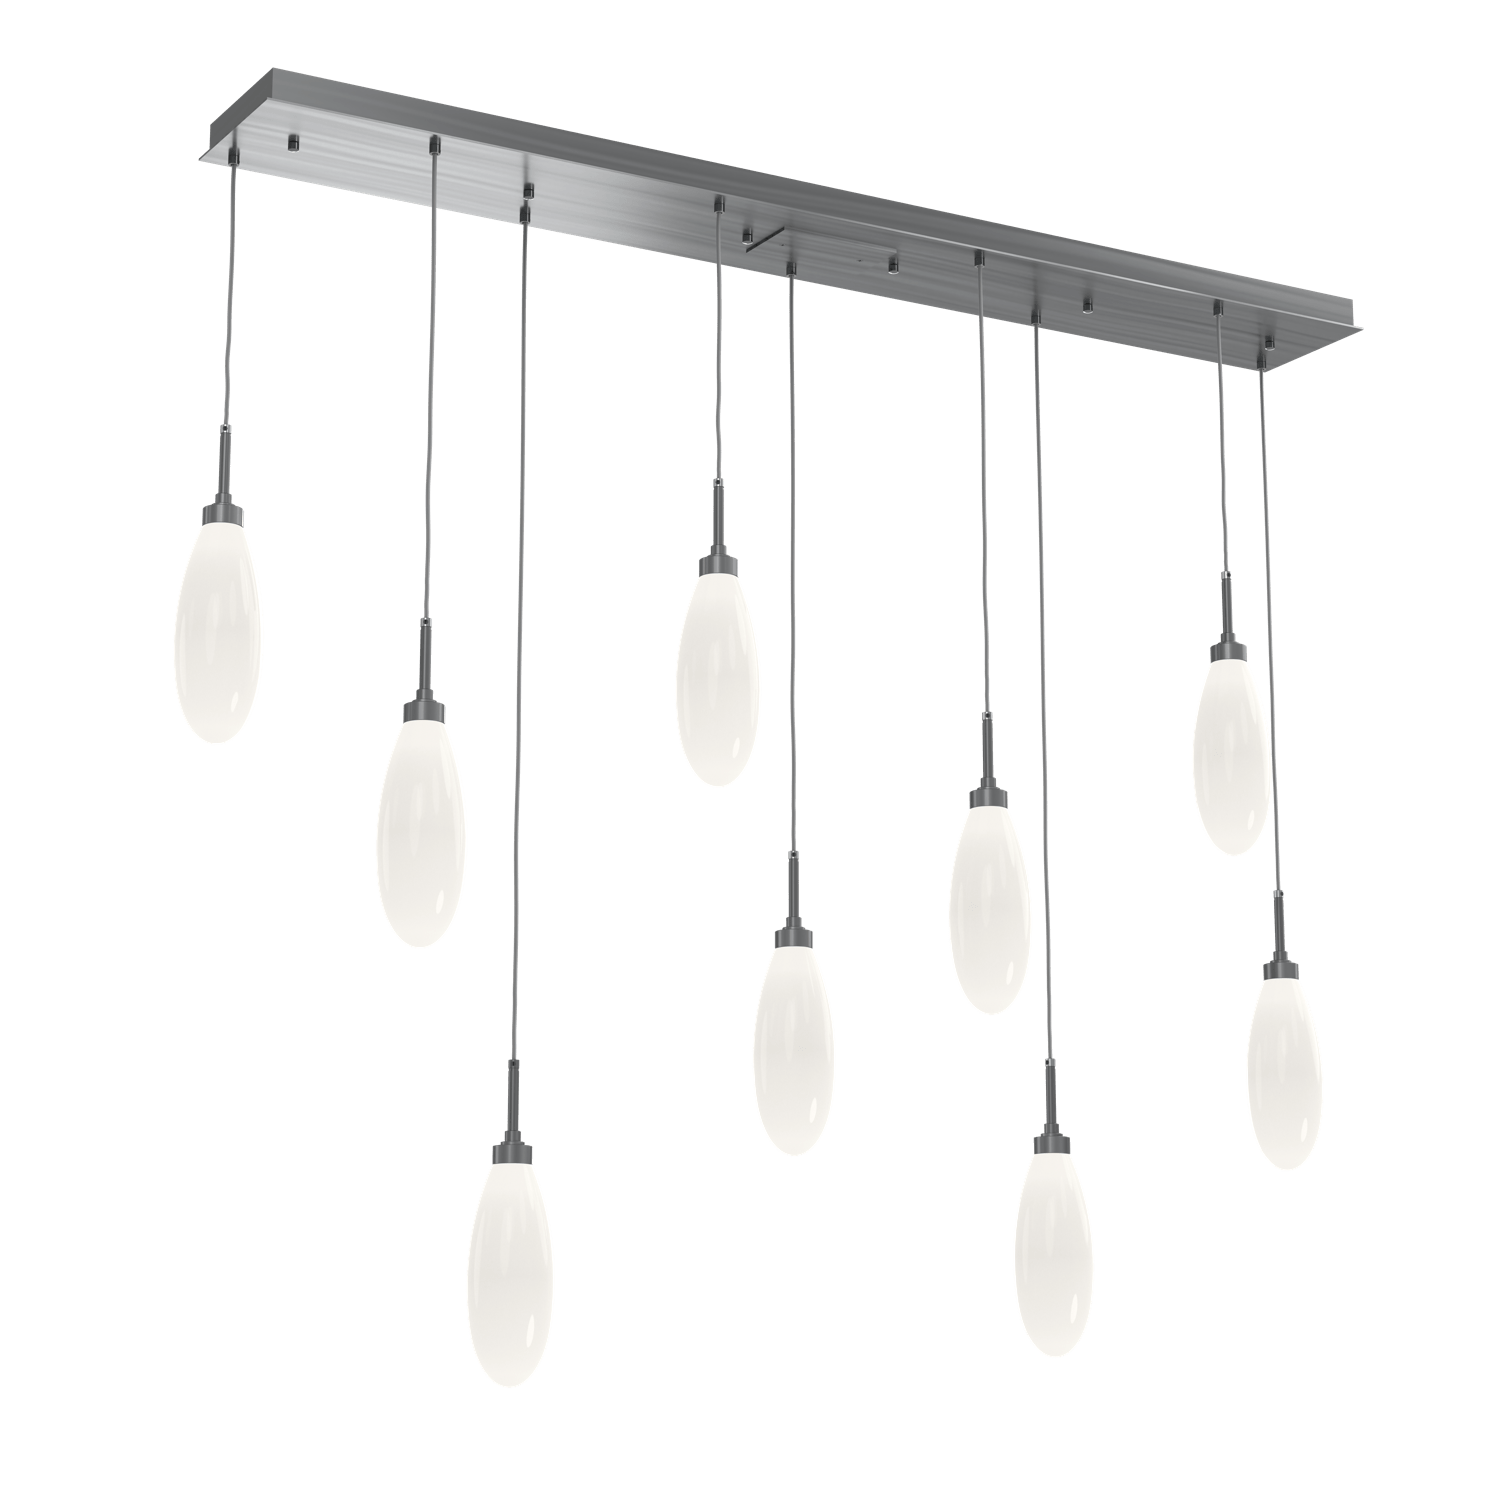 PLB0071-09-GM-WL-LL-Hammerton-Studio-Fiori-9-light-linear-pendant-chandelier-with-gunmetal-finish-and-opal-white-glass-shades-and-LED-lamping